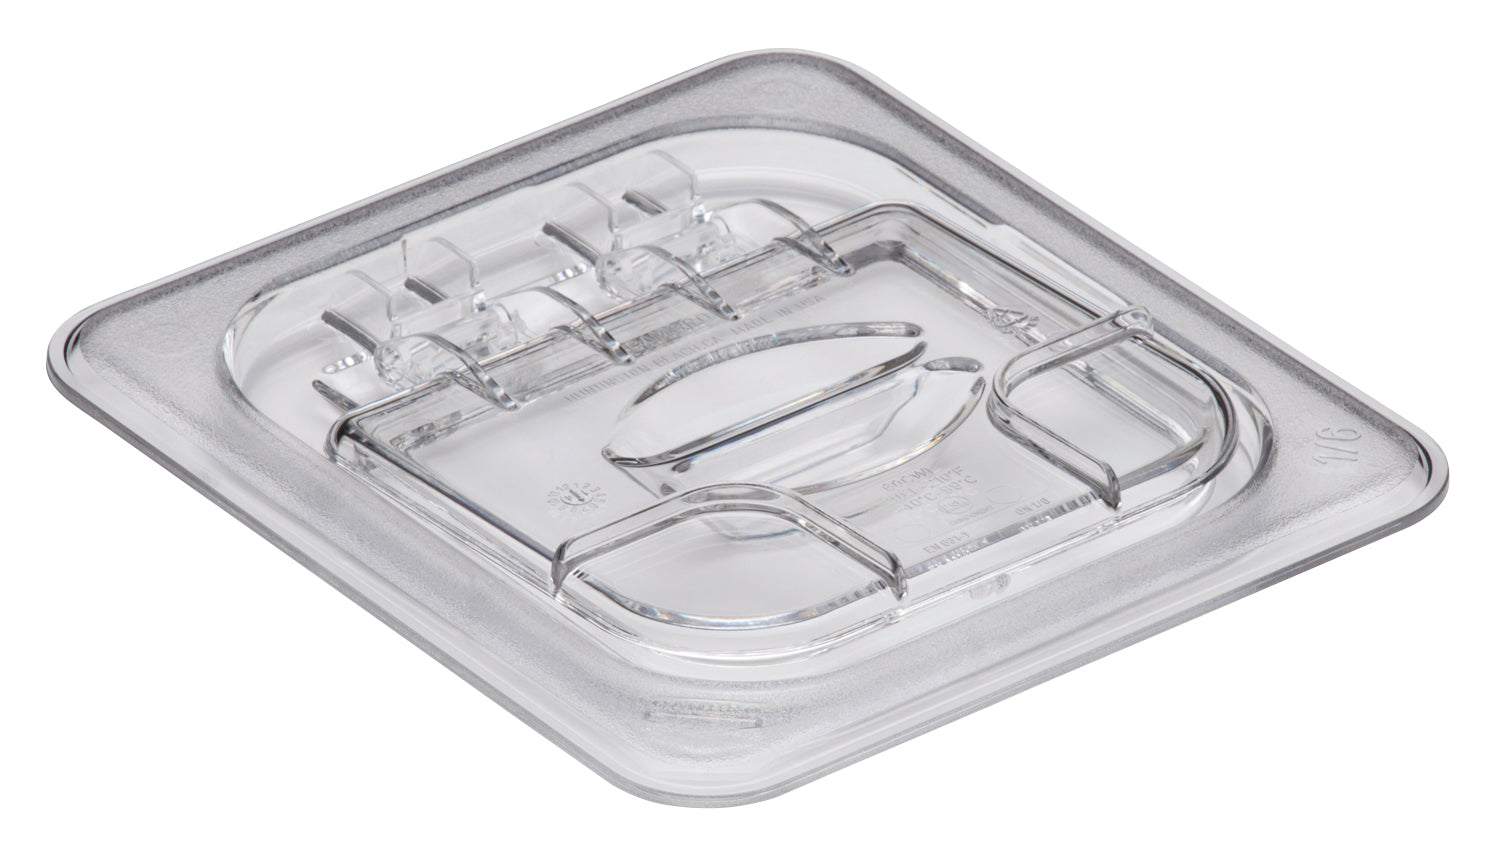 6 Pcs Polycarbonate Food Pan Lids With Handle, 1/6 Size Clear Hotel Pan Lid  Plastic Hotel Pan Cover For Restaurant Food Container And Storage, 6.9 X 6